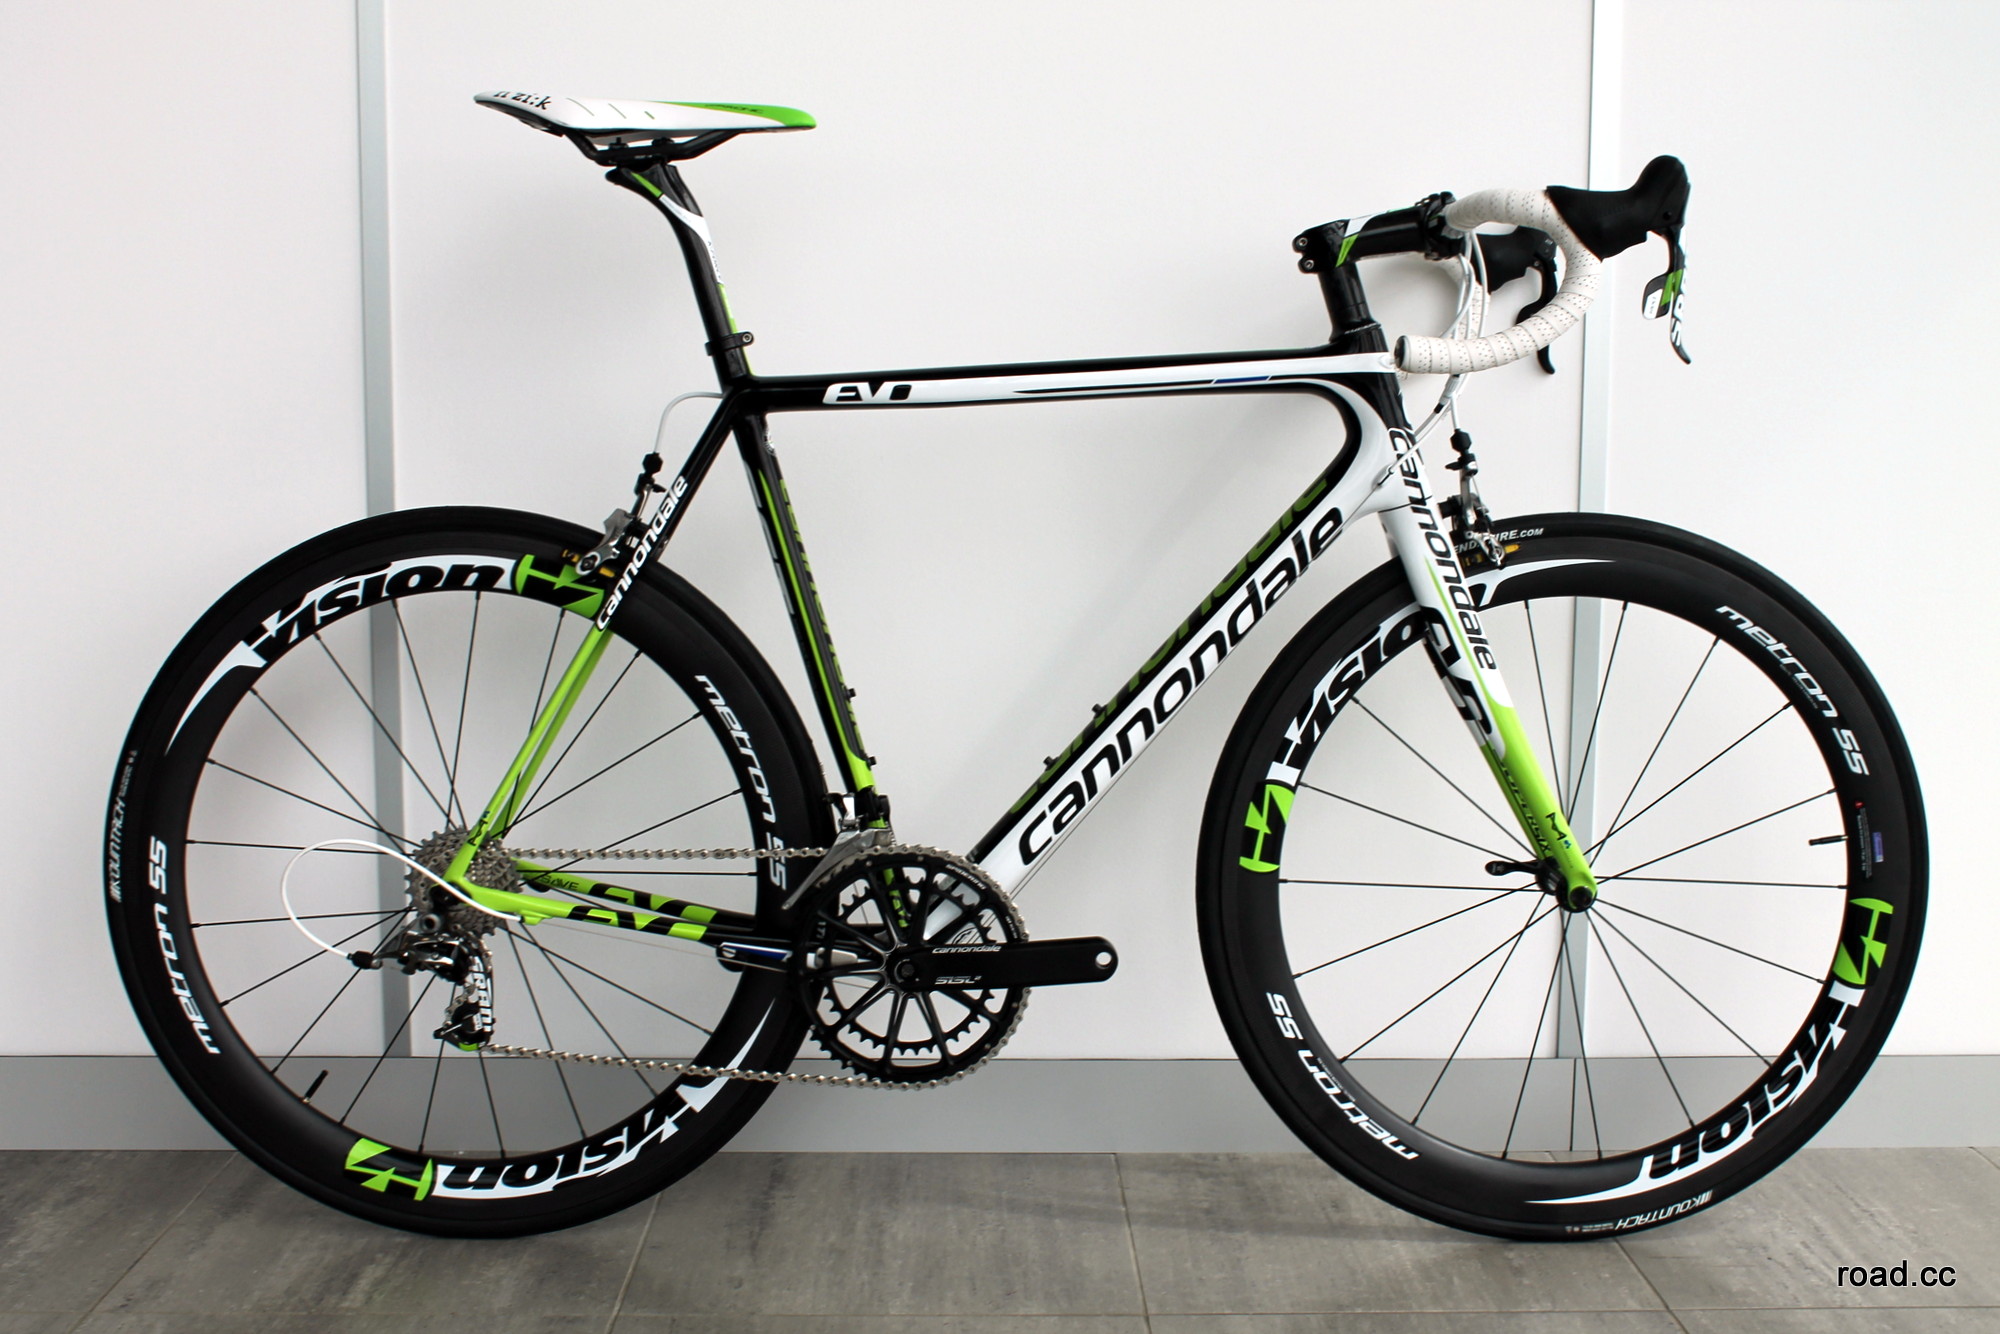 Cannondale 2014: Cheaper Evo and Synapse Disc launched | road.cc